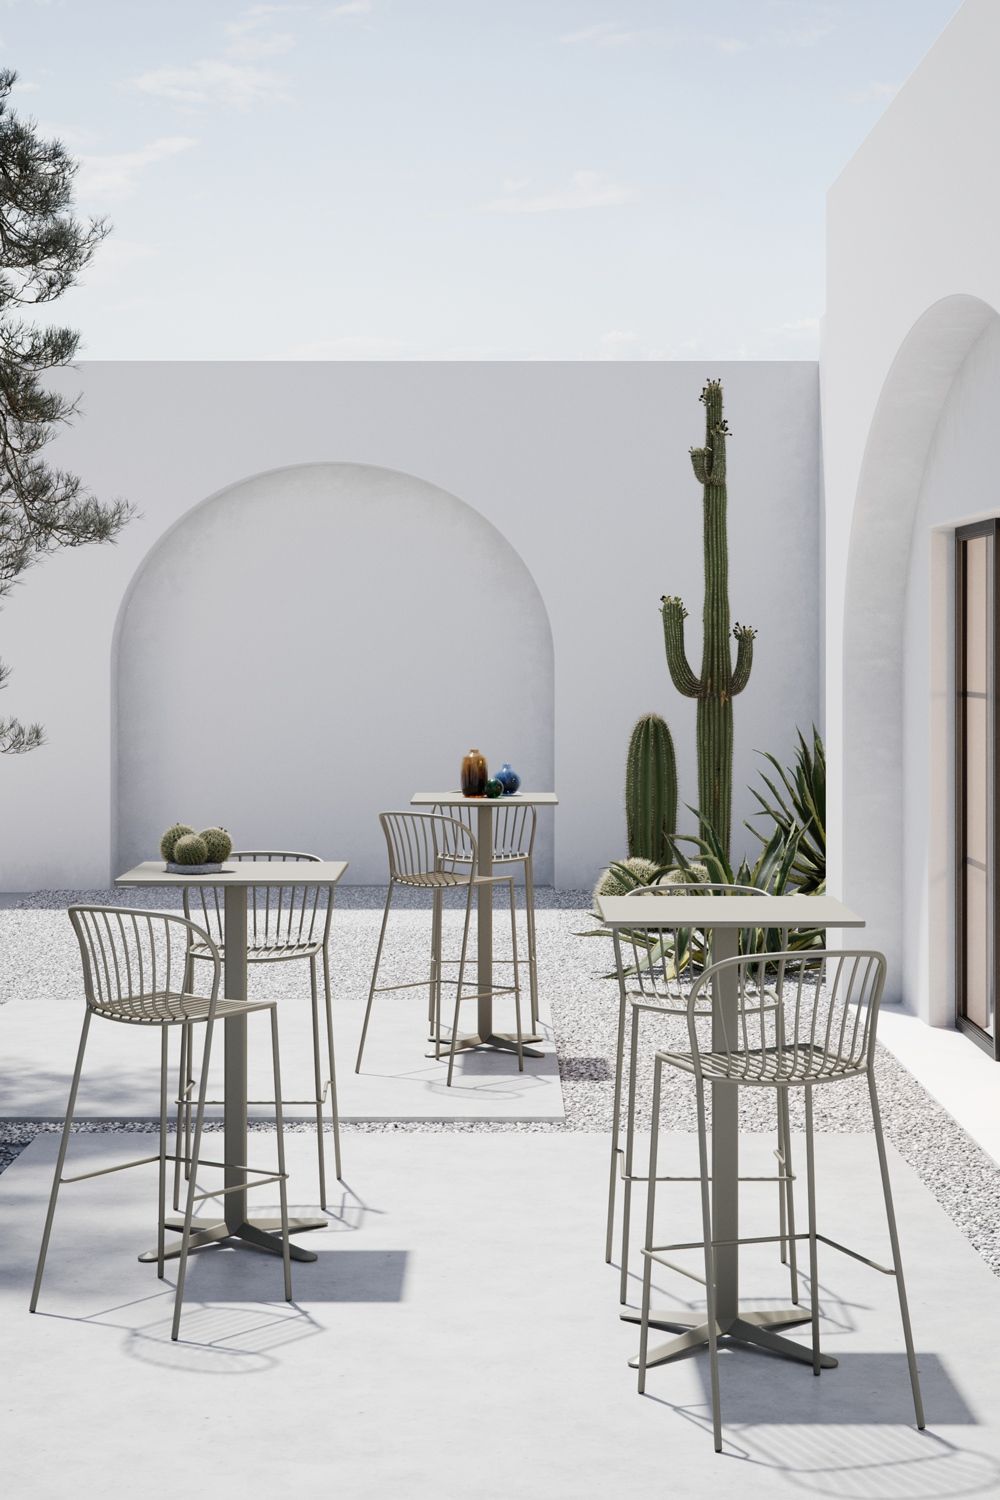 Enhance Your Outdoor Space with Stylish Bar Sets